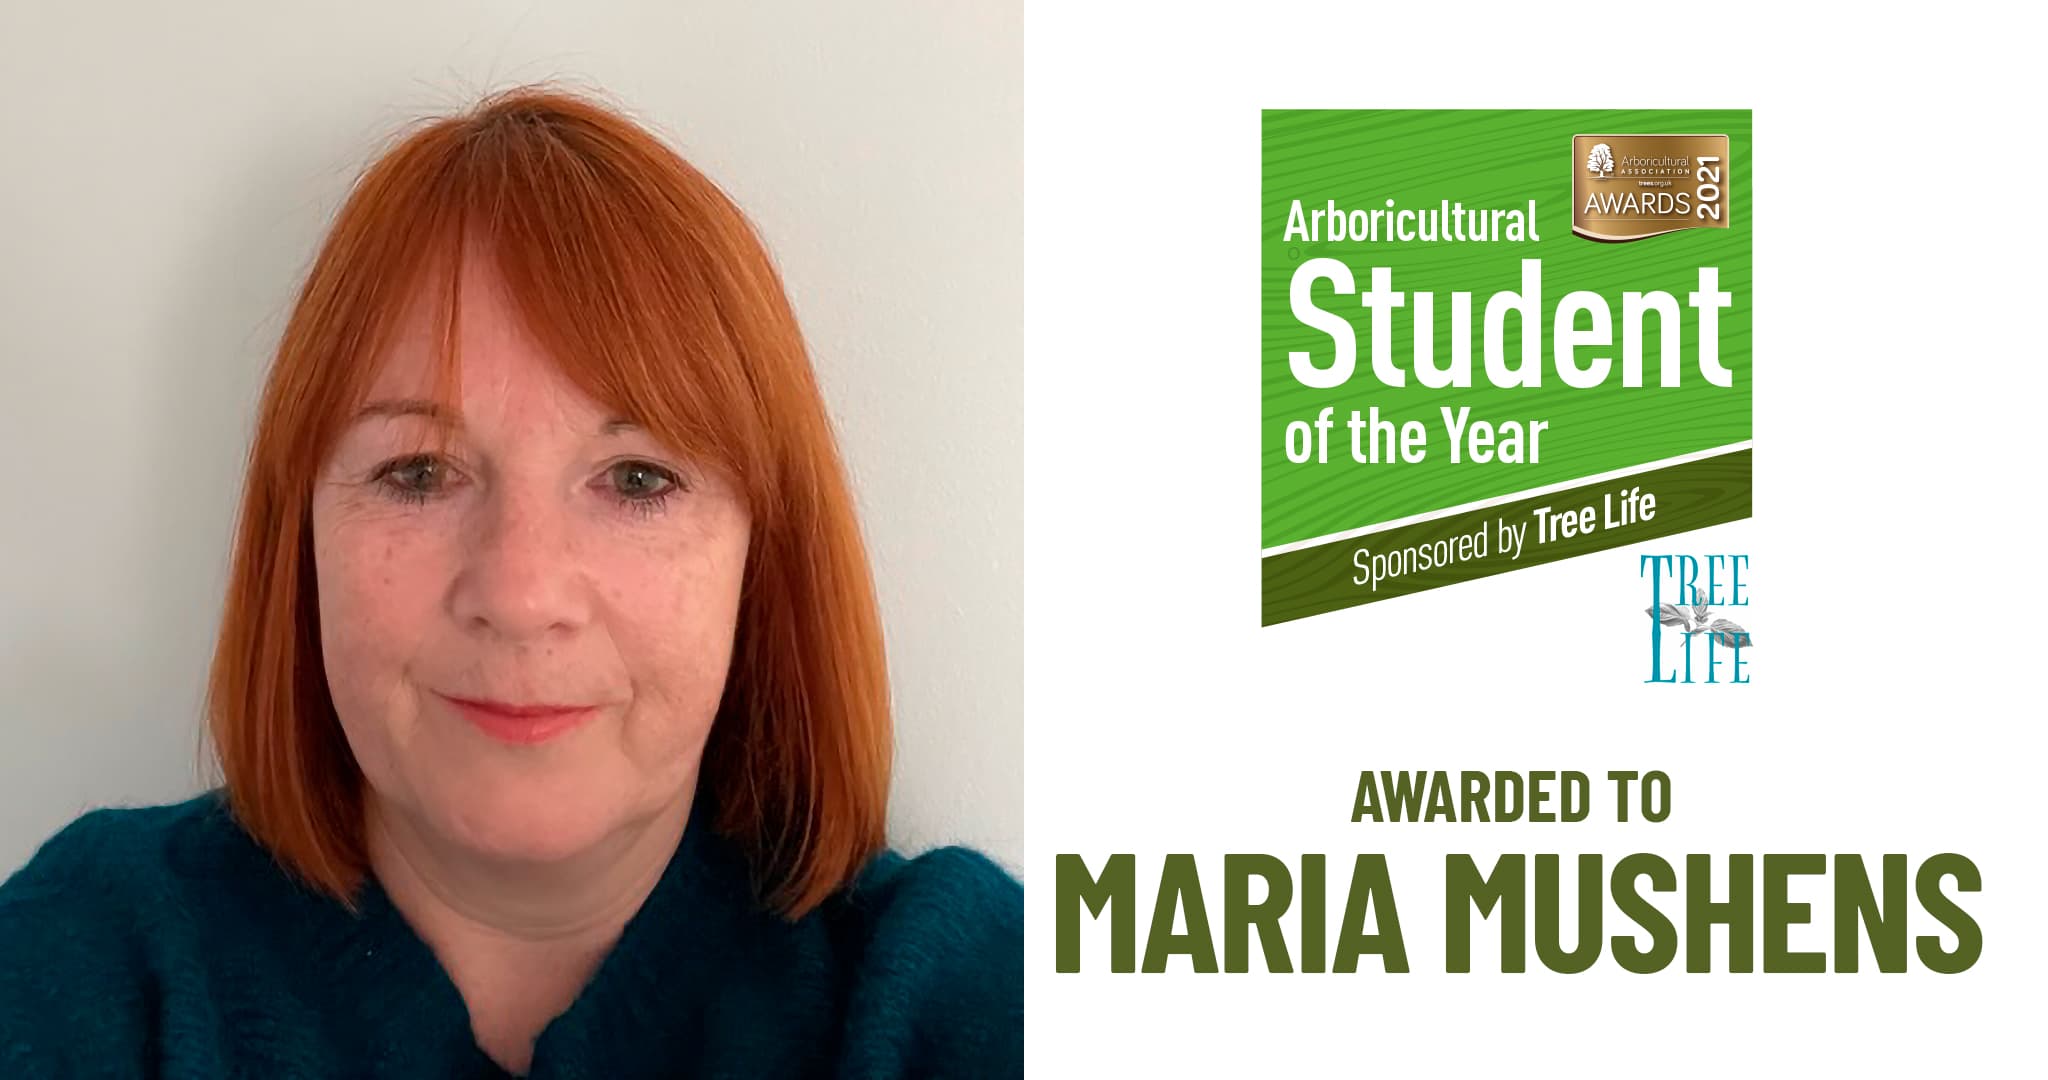 Maria Mushens awarded the AA Arboricultural Best Student of the Year Award 2021